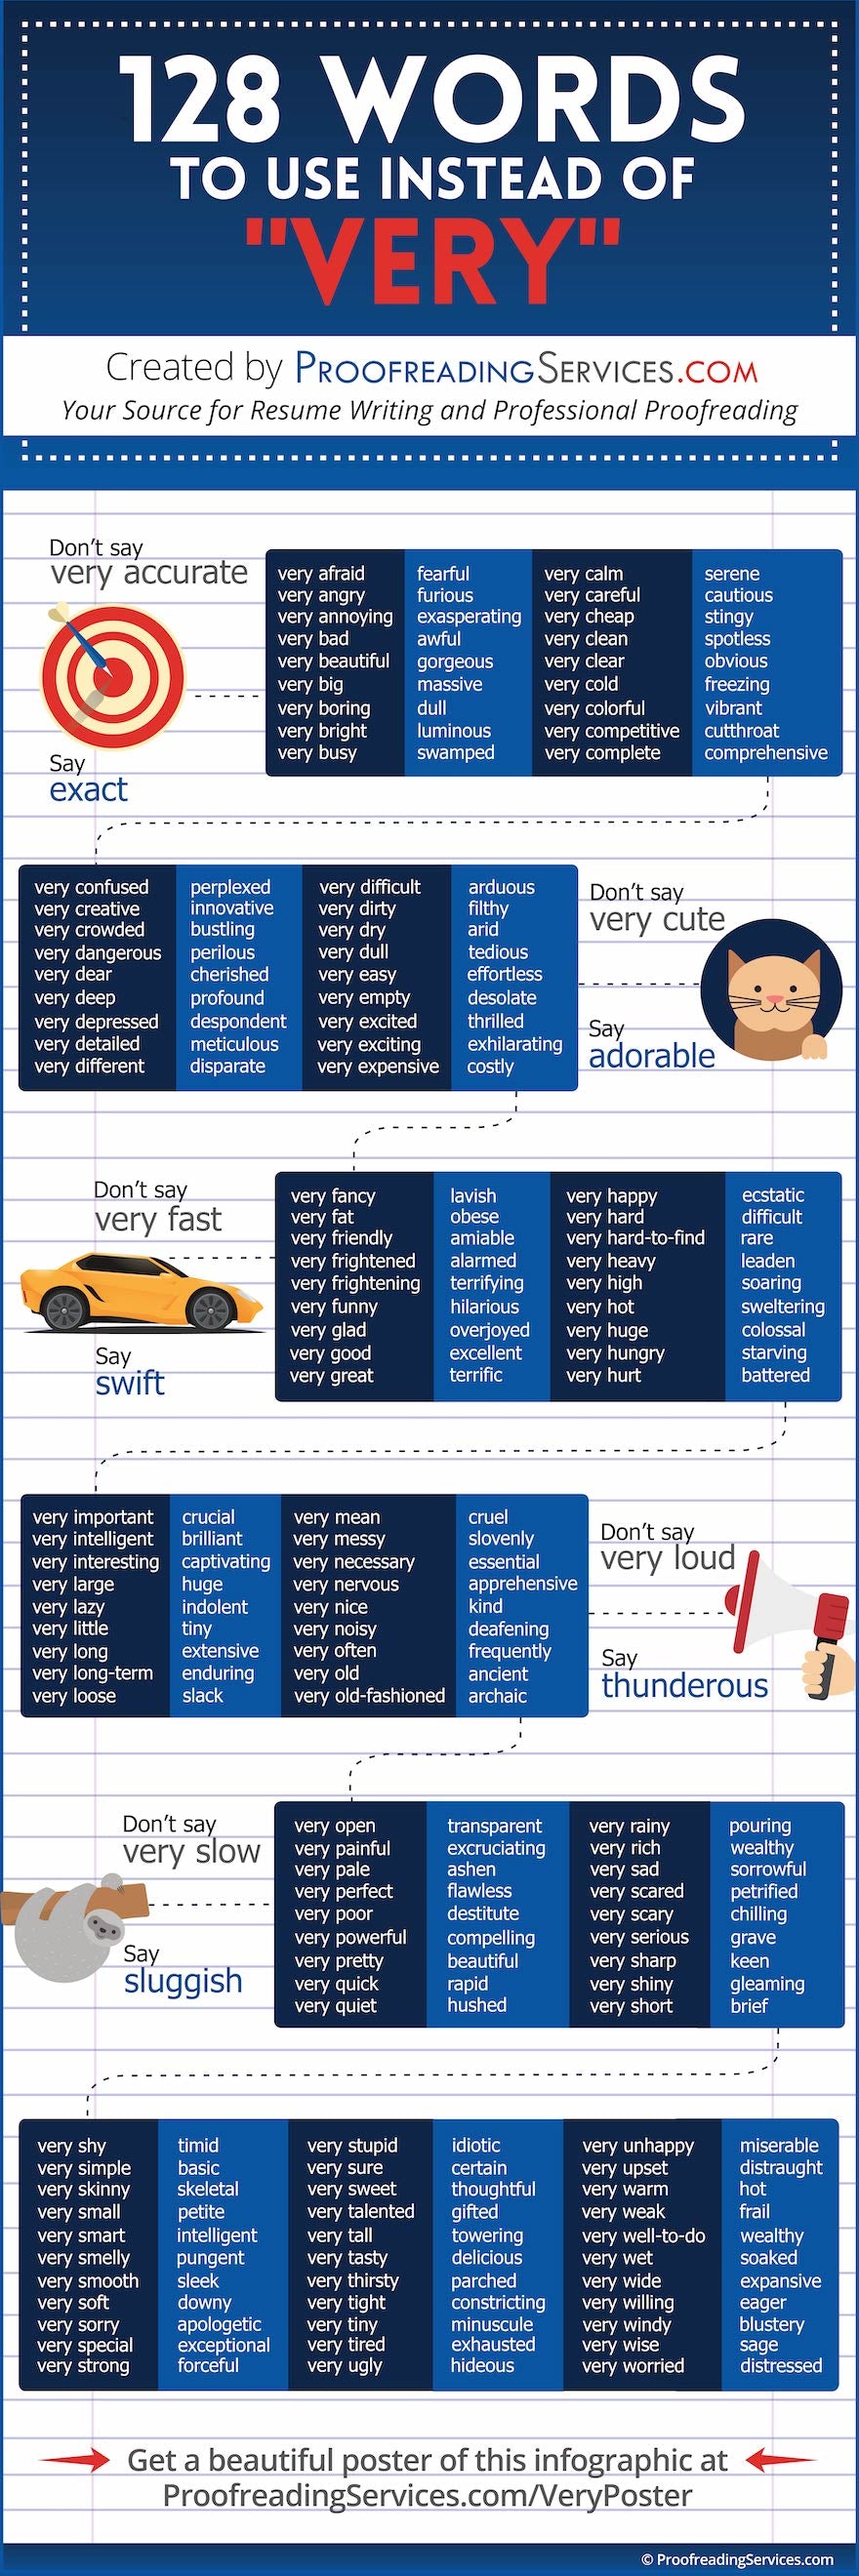 128 Words to Use Instead of Very infographic